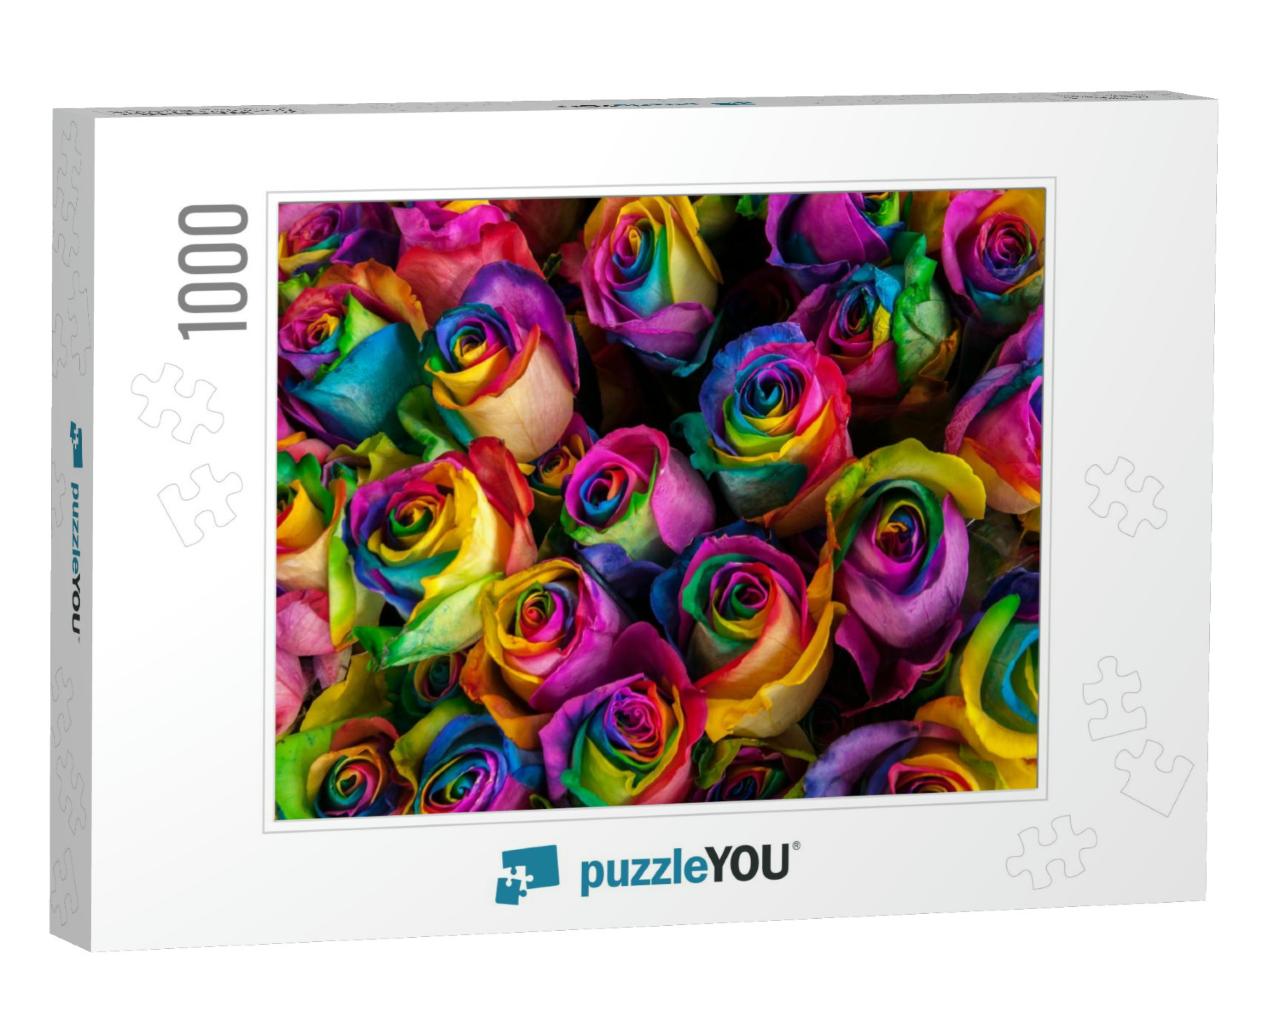 Colorful, Vibrant Rainbow Roses for Sale At an Outdoor Ma... Jigsaw Puzzle with 1000 pieces